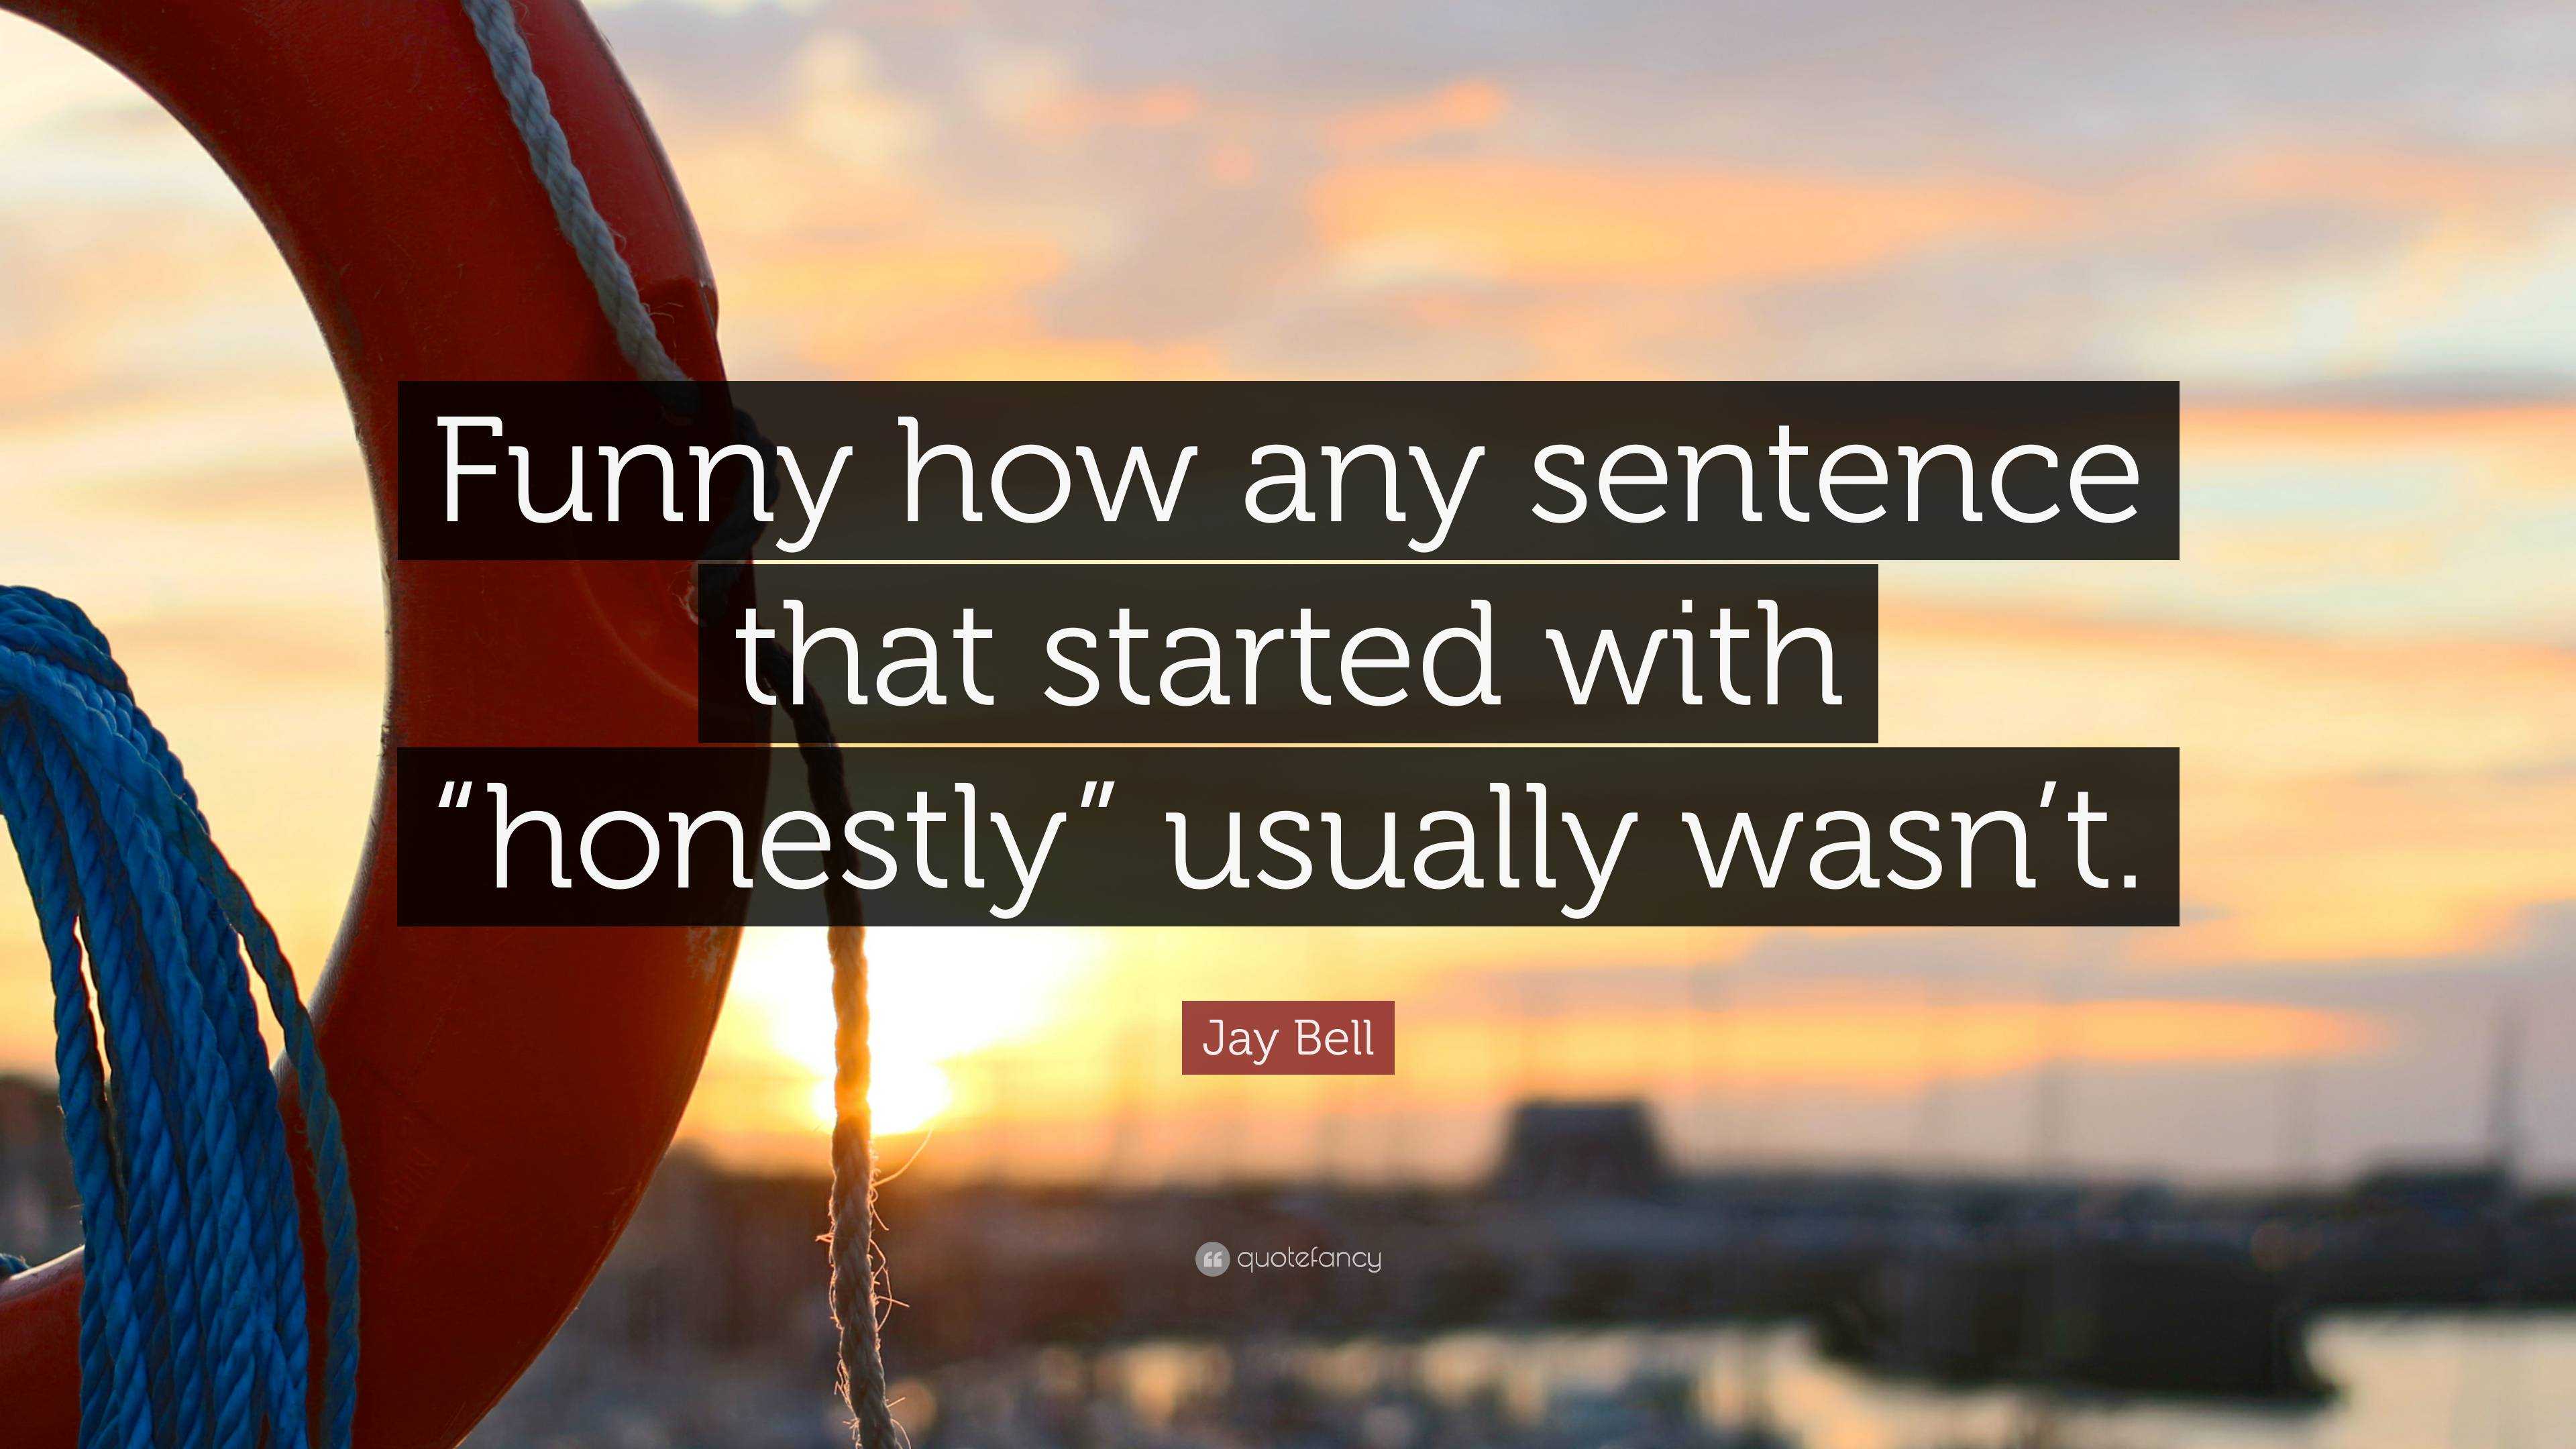 Jay Bell Quote: “Funny how any sentence that started with “honestly”  usually wasn't.”